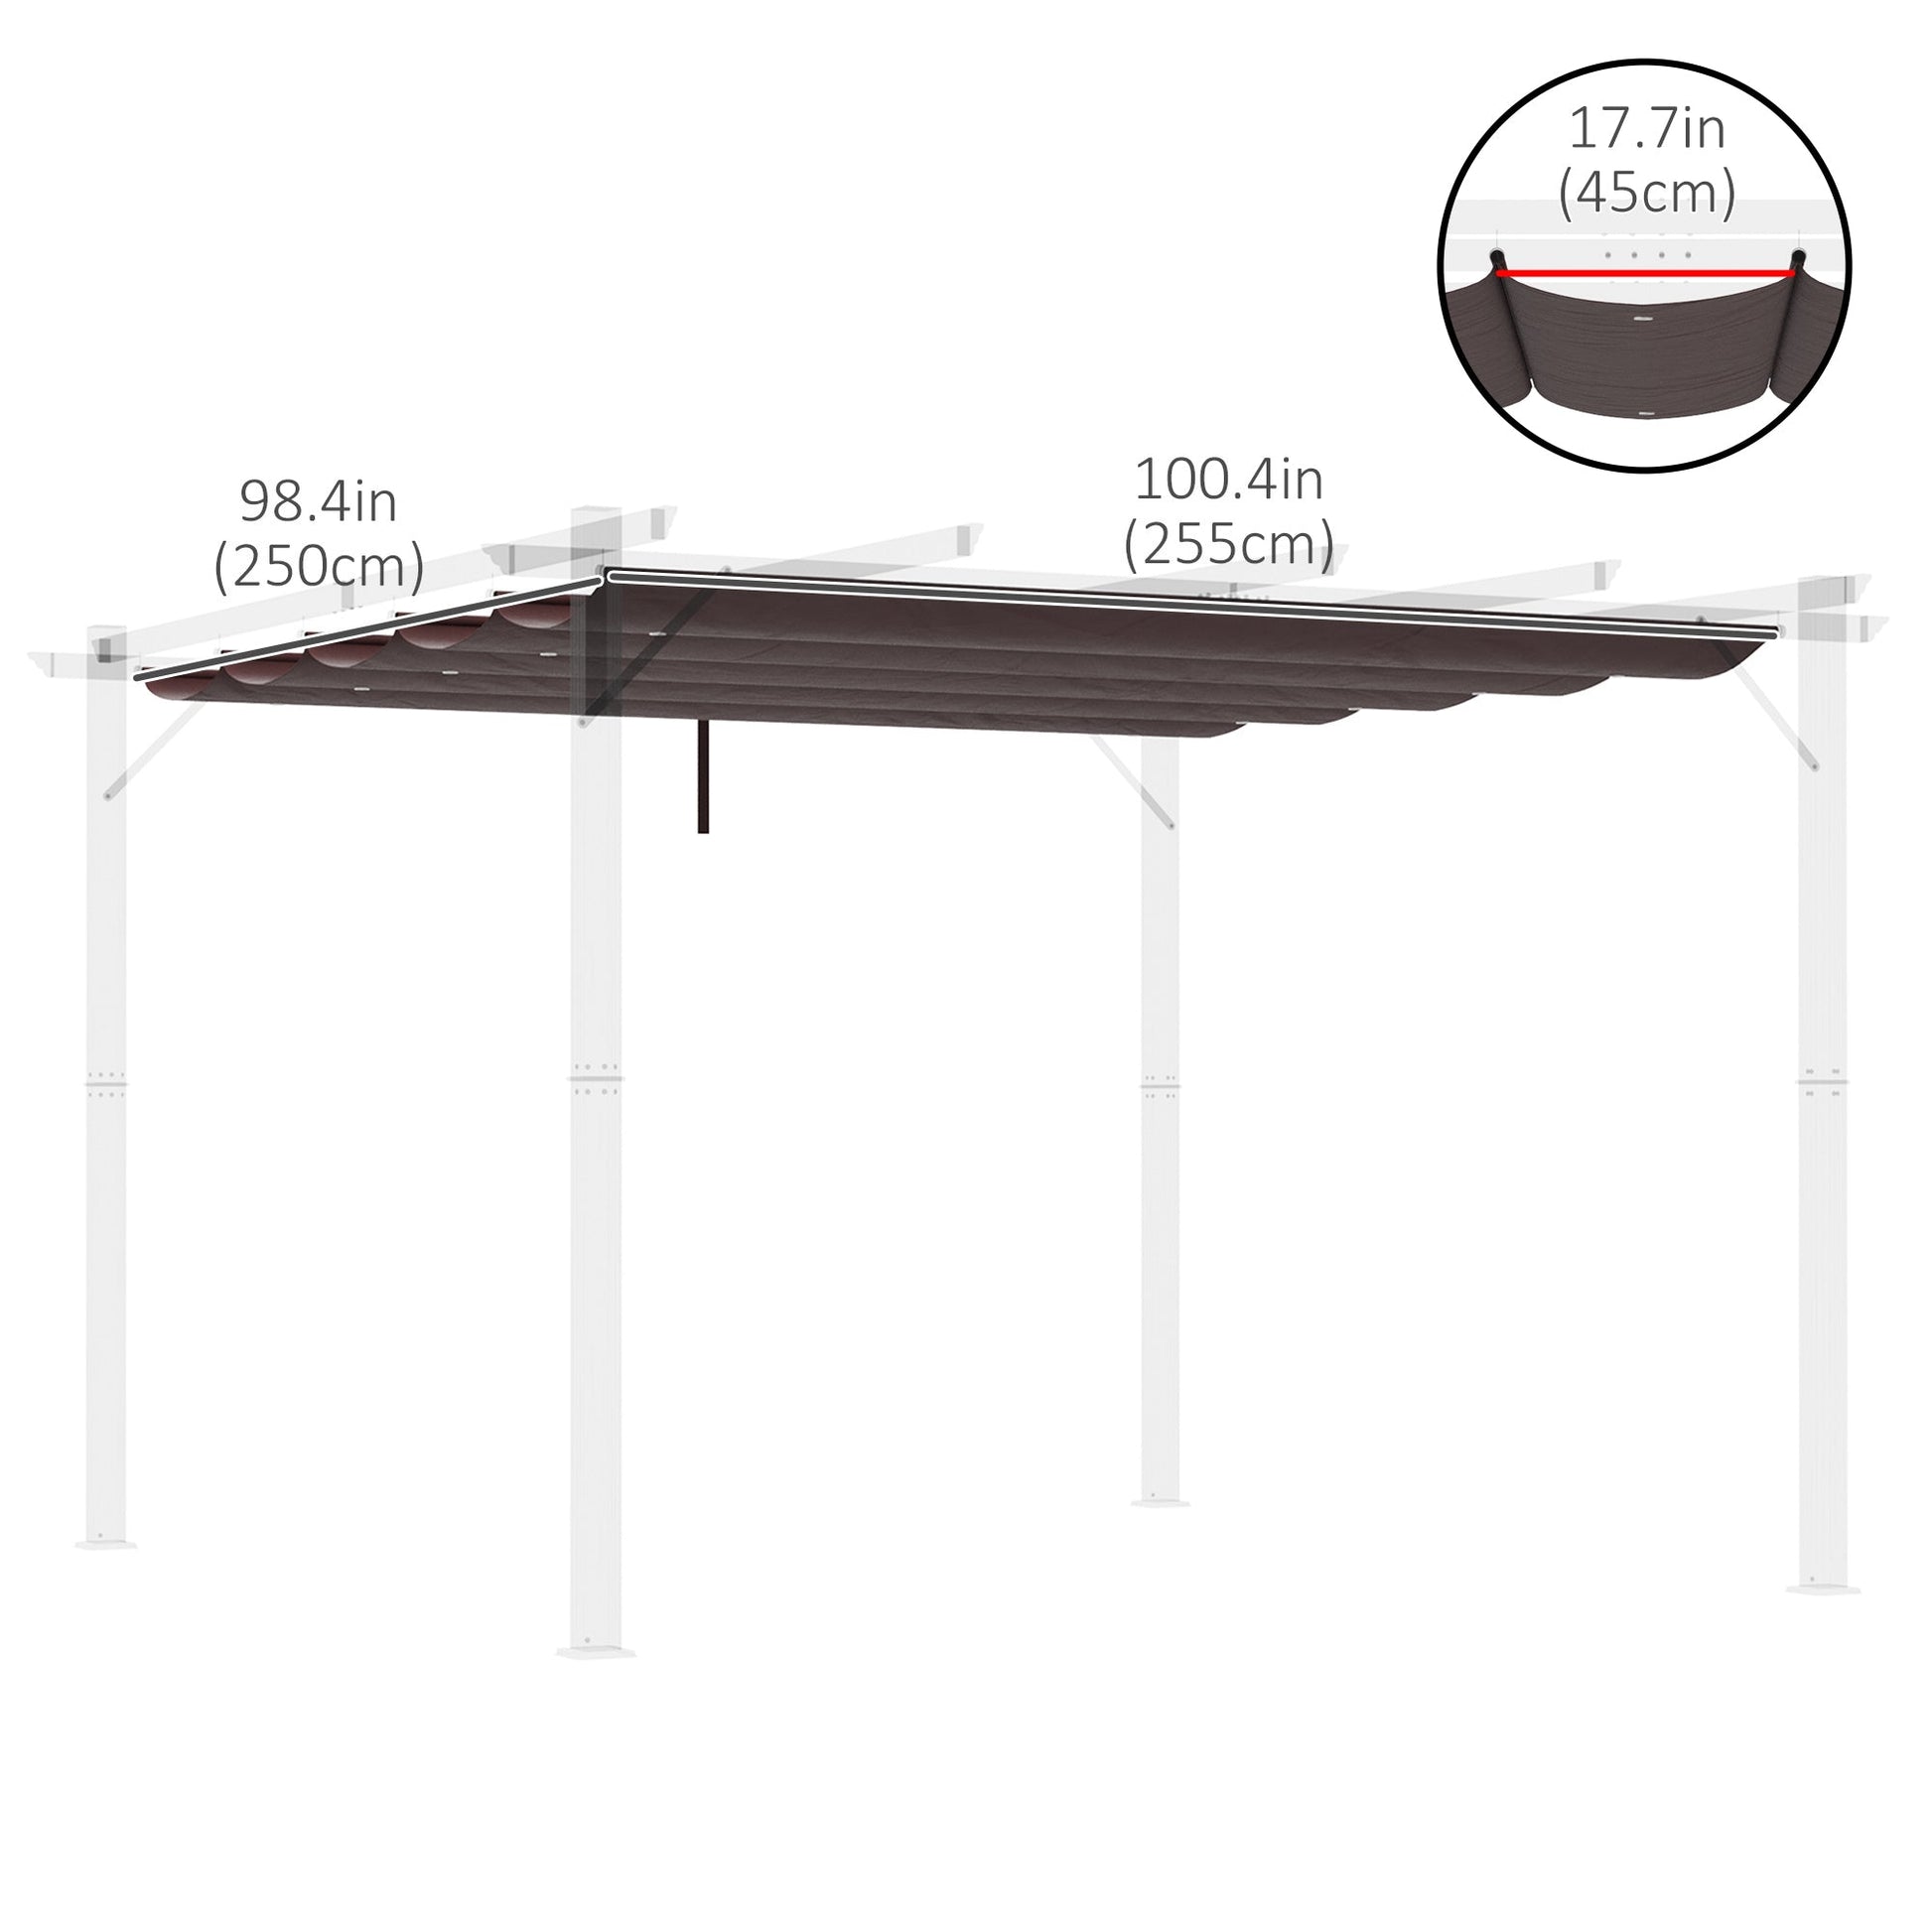 Retractable Replacement Pergola Canopy for 9.8' x 9.8' Pergola, Pergola Cover Replacement, Coffee at Gallery Canada